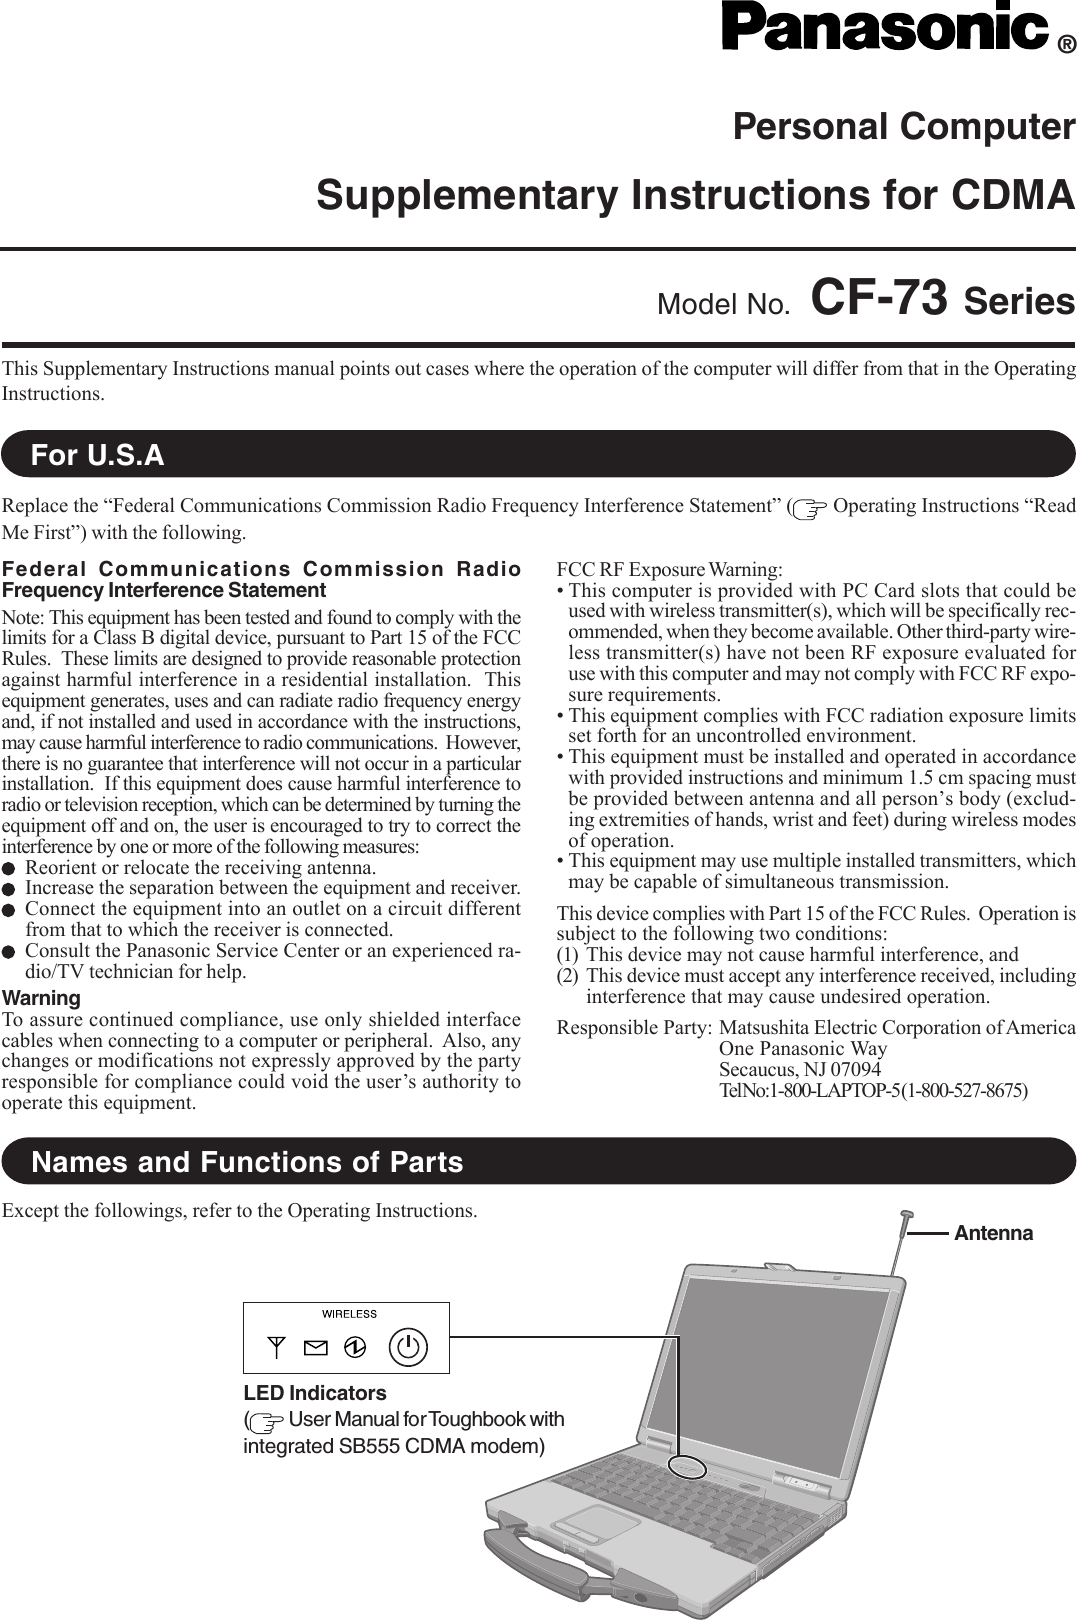 Personal ComputerSupplementary Instructions for CDMAThis Supplementary Instructions manual points out cases where the operation of the computer will differ from that in the OperatingInstructions.®Model No. CF-73 SeriesReplace the “Federal Communications Commission Radio Frequency Interference Statement” (  Operating Instructions “ReadMe First”) with the following.For U.S.ANames and Functions of PartsFederal Communications Commission RadioFrequency Interference StatementNote: This equipment has been tested and found to comply with thelimits for a Class B digital device, pursuant to Part 15 of the FCCRules.  These limits are designed to provide reasonable protectionagainst harmful interference in a residential installation.  Thisequipment generates, uses and can radiate radio frequency energyand, if not installed and used in accordance with the instructions,may cause harmful interference to radio communications.  However,there is no guarantee that interference will not occur in a particularinstallation.  If this equipment does cause harmful interference toradio or television reception, which can be determined by turning theequipment off and on, the user is encouraged to try to correct theinterference by one or more of the following measures:Reorient or relocate the receiving antenna.Increase the separation between the equipment and receiver.Connect the equipment into an outlet on a circuit differentfrom that to which the receiver is connected.Consult the Panasonic Service Center or an experienced ra-dio/TV technician for help.WarningTo assure continued compliance, use only shielded interfacecables when connecting to a computer or peripheral.  Also, anychanges or modifications not expressly approved by the partyresponsible for compliance could void the user’s authority tooperate this equipment.FCC RF Exposure Warning:• This computer is provided with PC Card slots that could beused with wireless transmitter(s), which will be specifically rec-ommended, when they become available. Other third-party wire-less transmitter(s) have not been RF exposure evaluated foruse with this computer and may not comply with FCC RF expo-sure requirements.• This equipment complies with FCC radiation exposure limitsset forth for an uncontrolled environment.• This equipment must be installed and operated in accordancewith provided instructions and minimum 1.5 cm spacing mustbe provided between antenna and all person’s body (exclud-ing extremities of hands, wrist and feet) during wireless modesof operation.• This equipment may use multiple installed transmitters, whichmay be capable of simultaneous transmission.This device complies with Part 15 of the FCC Rules.  Operation issubject to the following two conditions:(1) This device may not cause harmful interference, and(2) This device must accept any interference received, includinginterference that may cause undesired operation.Responsible Party: Matsushita Electric Corporation of AmericaOne Panasonic WaySecaucus, NJ 07094Tel No:1-800-LAPTOP-5 (1-800-527-8675)Except the followings, refer to the Operating Instructions.AntennaLED Indicators( User Manual for Toughbook withintegrated SB555 CDMA modem)